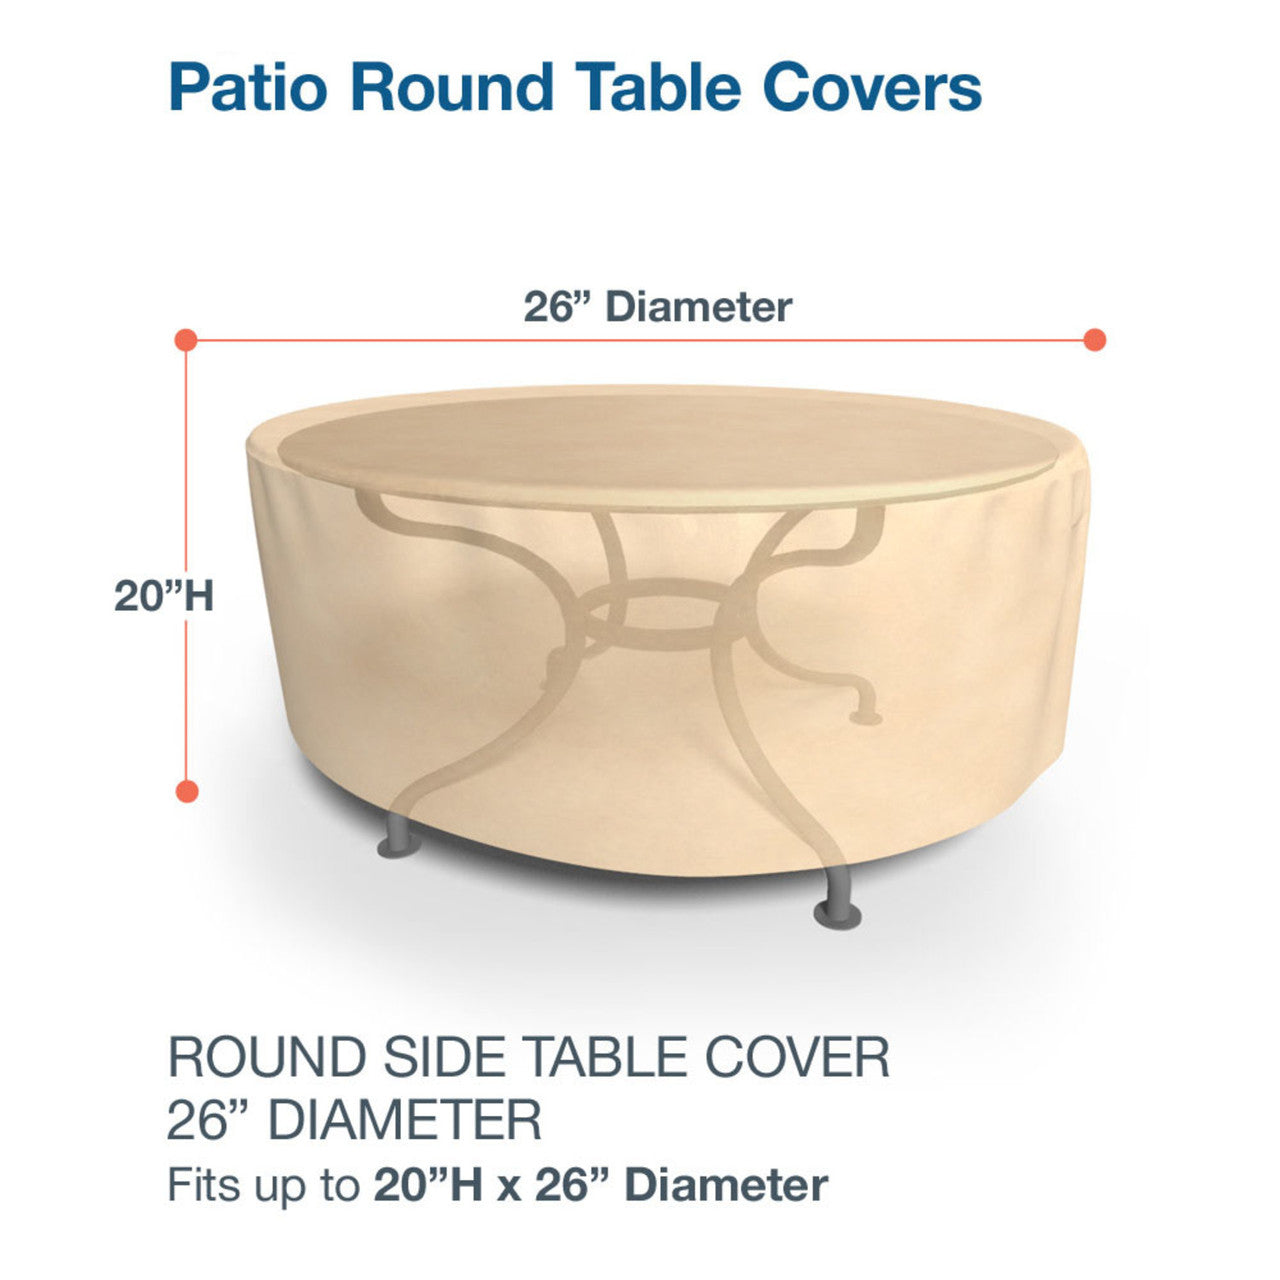 Budge Industries All Seasons Round Patio Table Cover